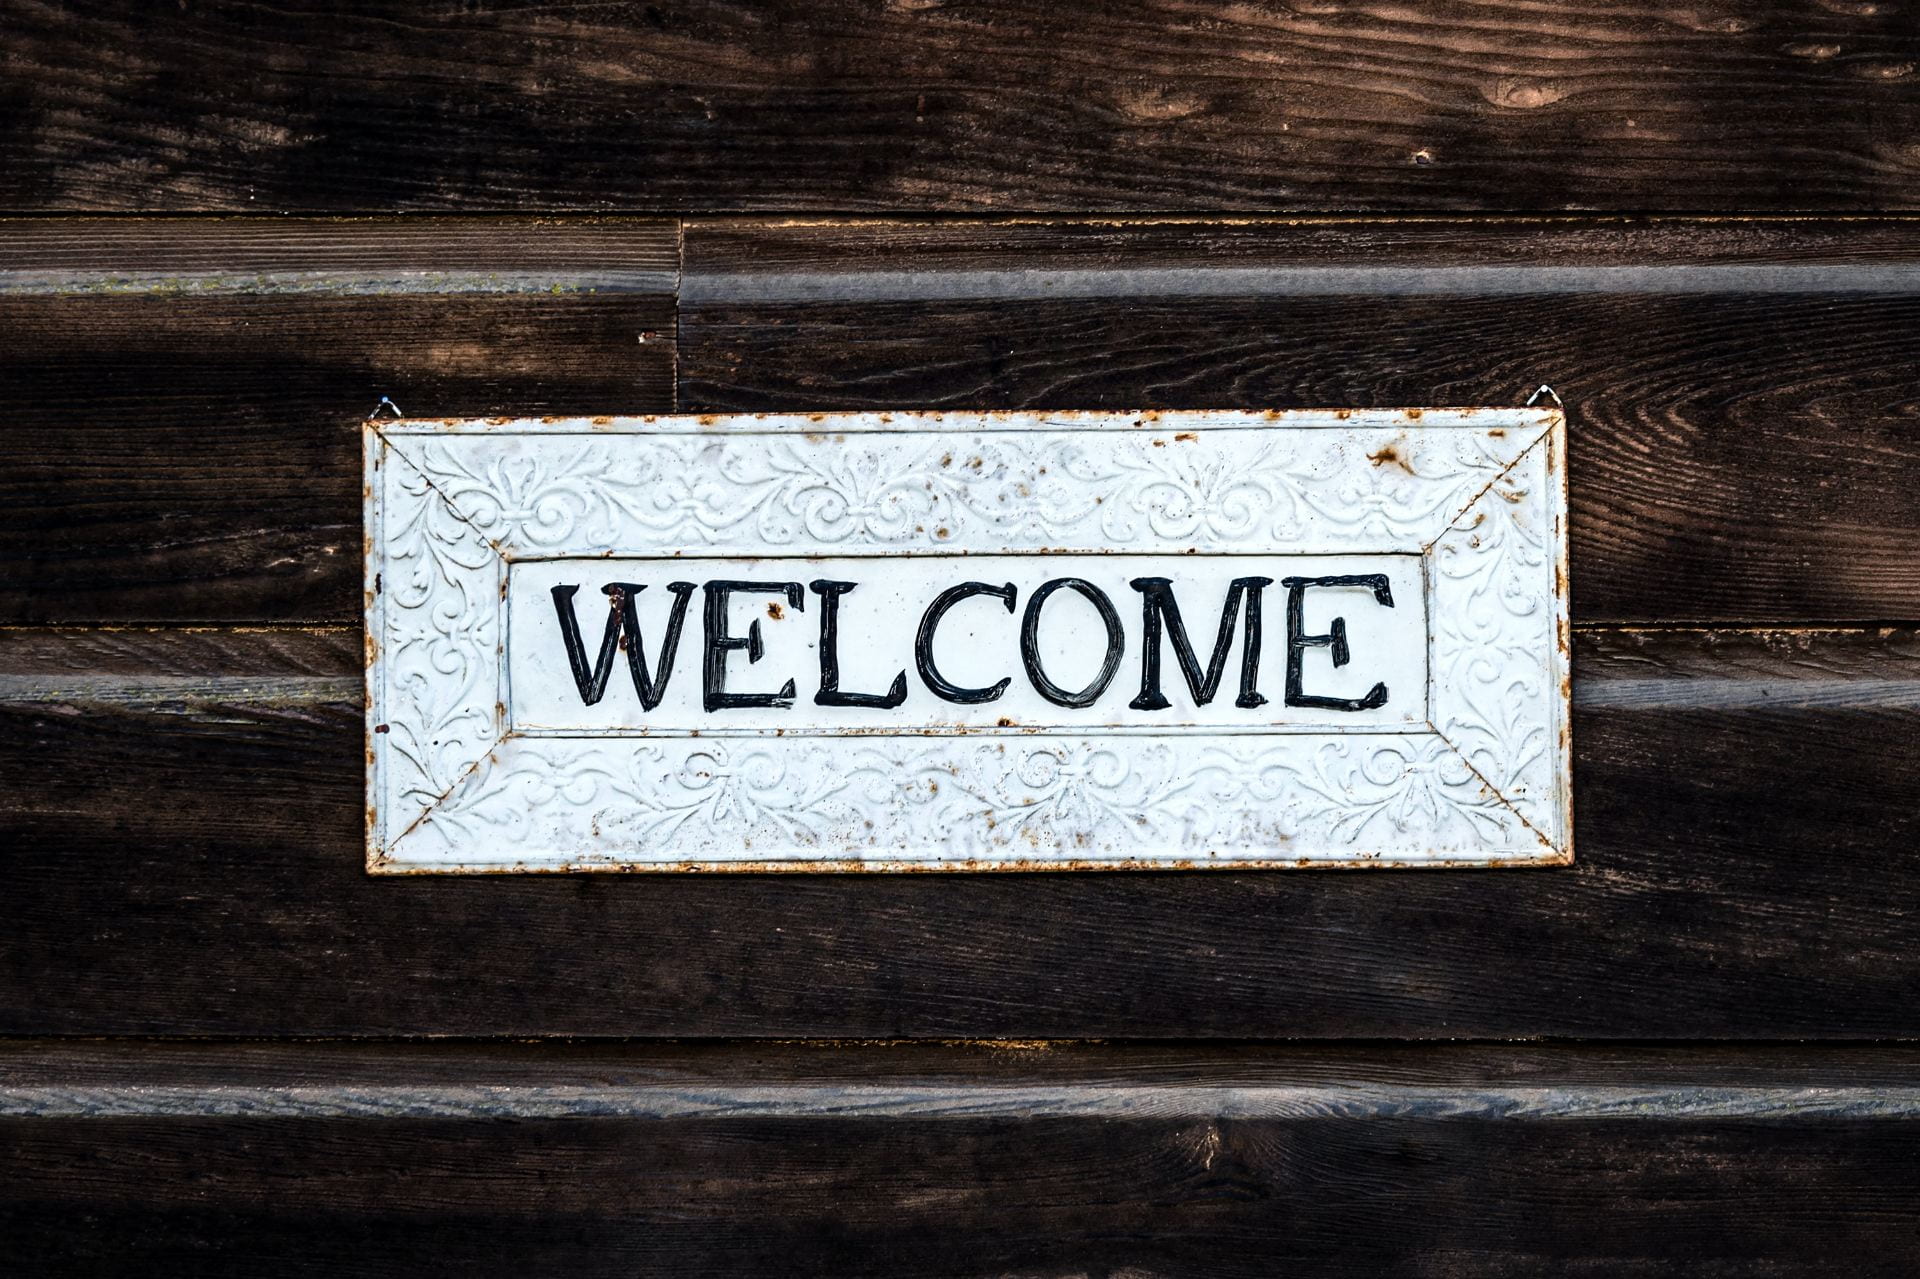 A welcome sign rests against a wooden background.